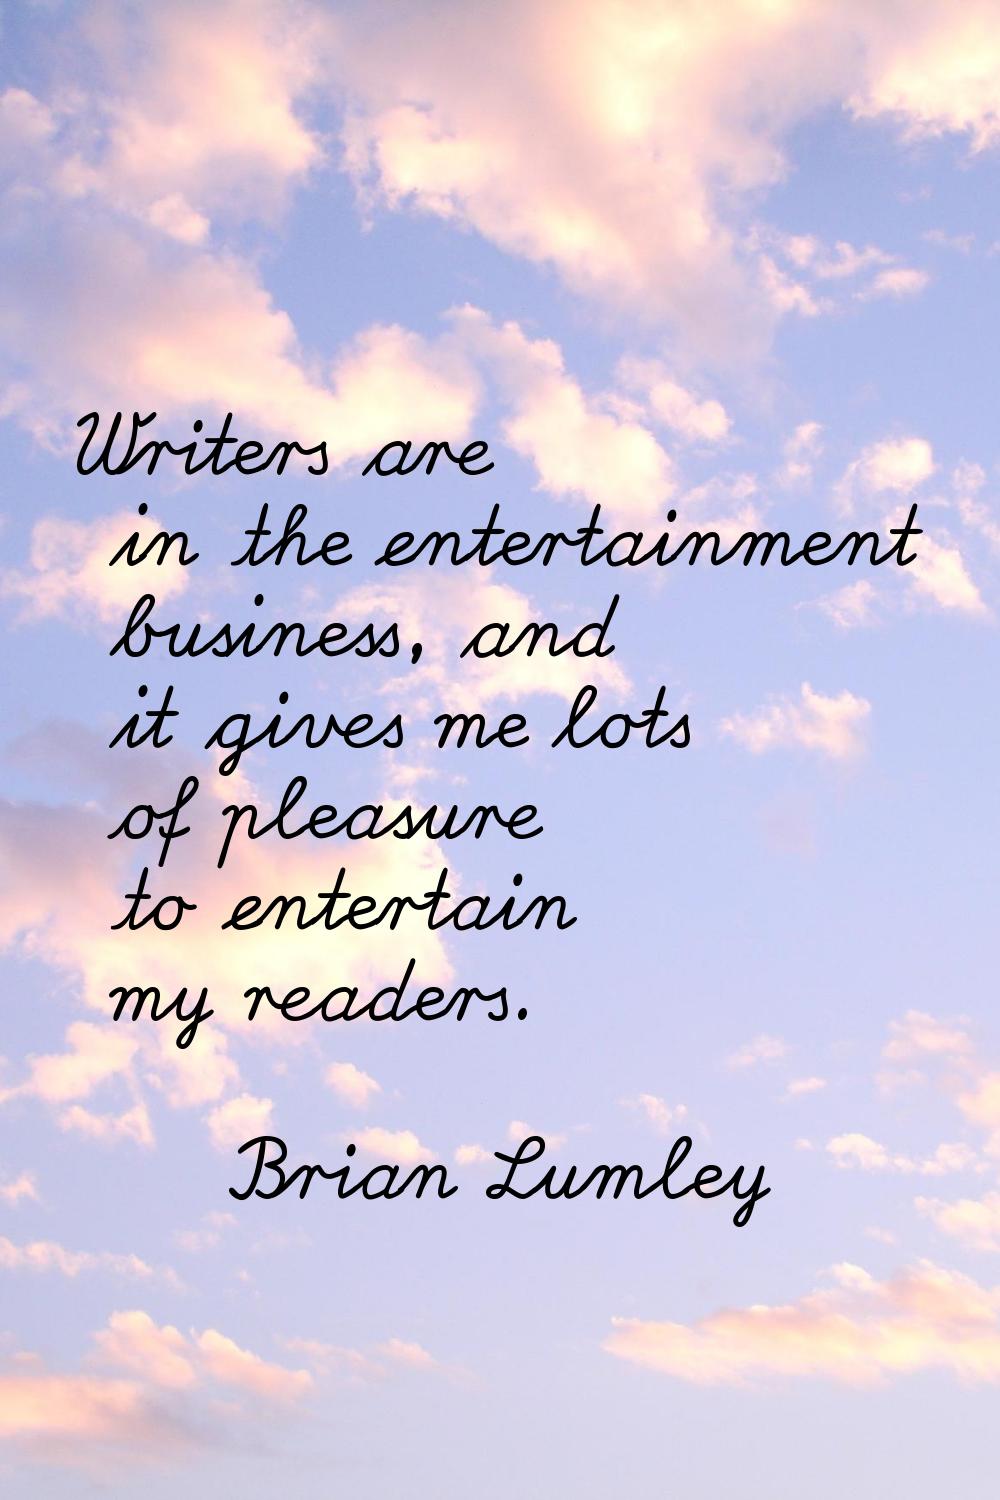 Writers are in the entertainment business, and it gives me lots of pleasure to entertain my readers